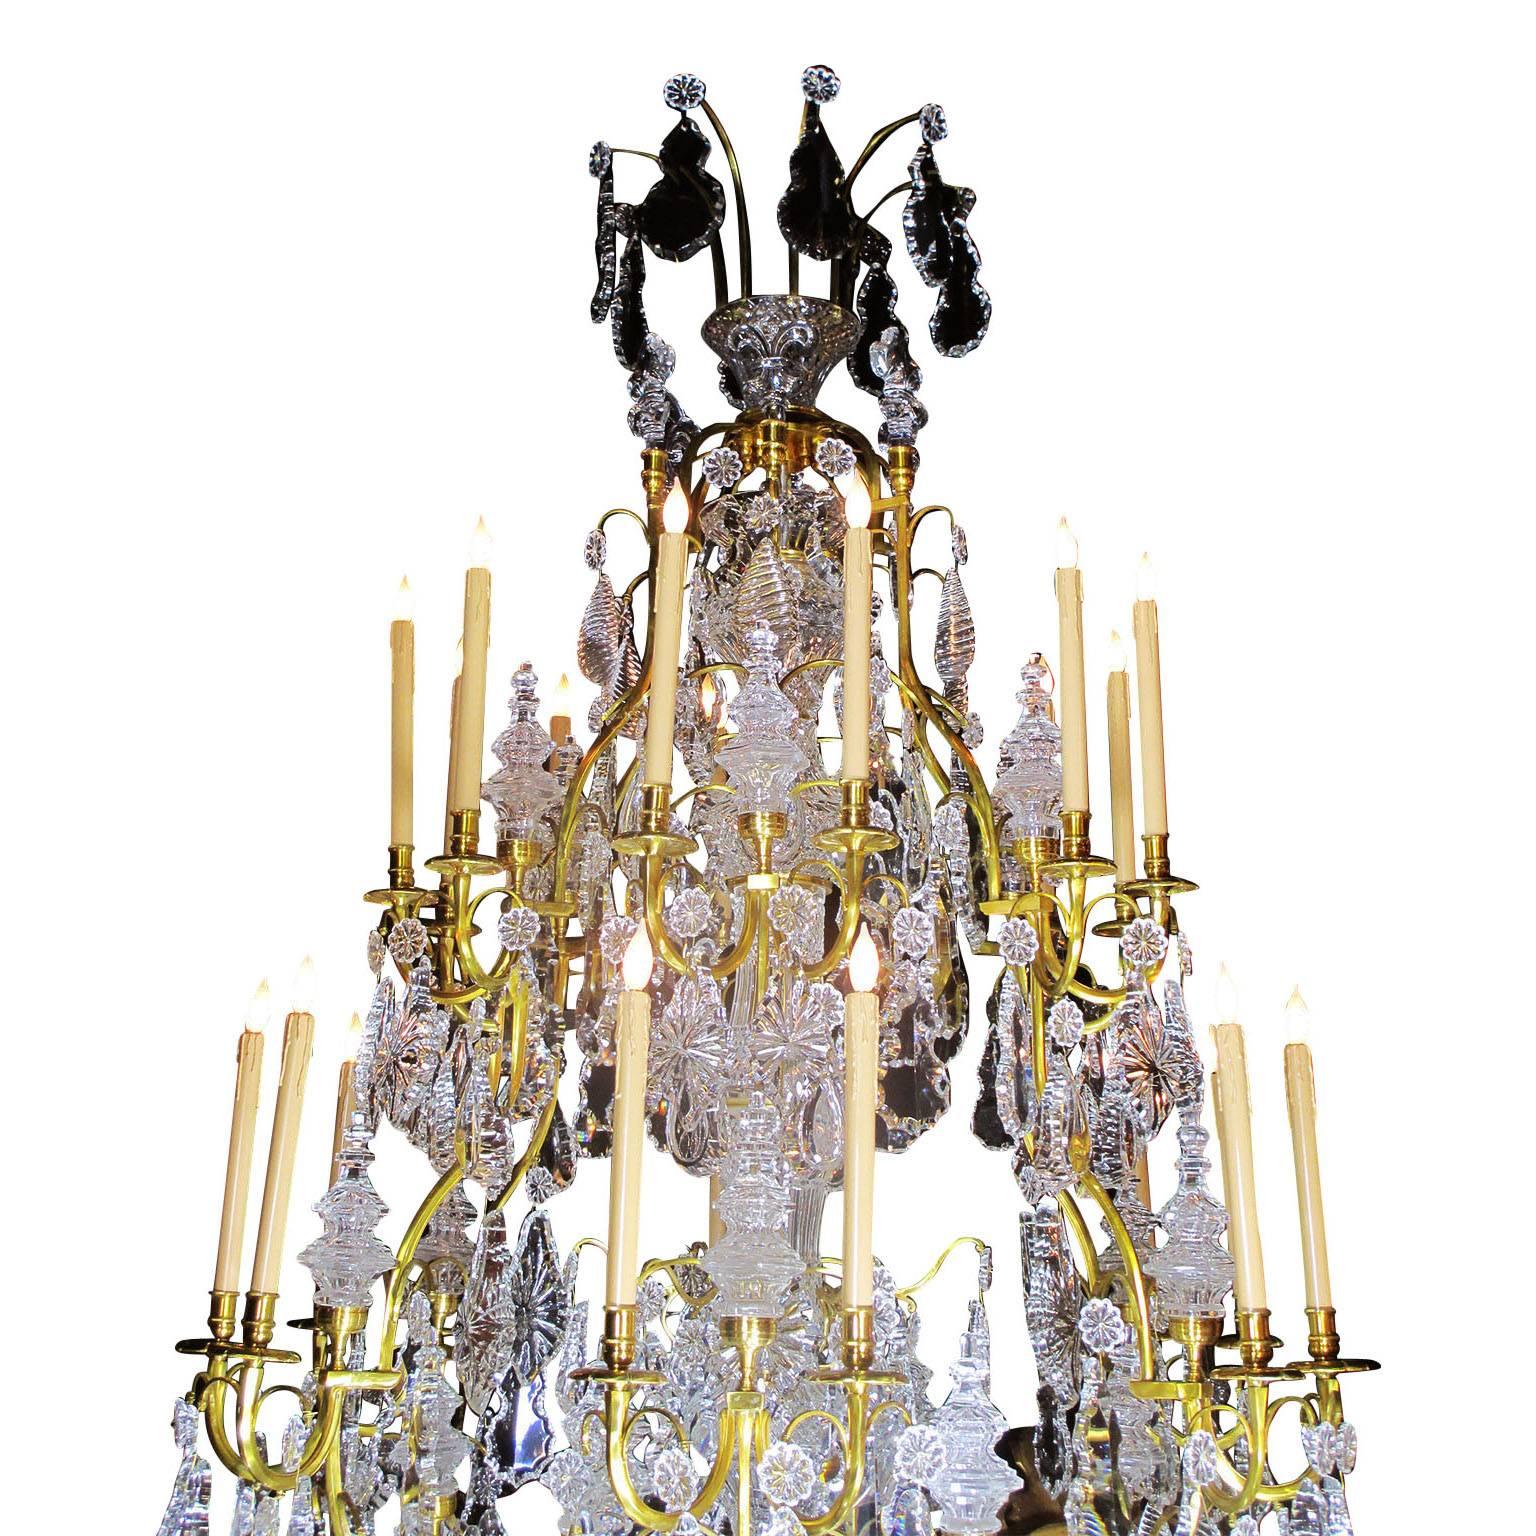 A very large fine and palatial 20th century Louis XV style gilt bronze and cut-glass twenty-four-light chandelier (There are two of these chandeliers available), the solid bronze frame with towers and Fleur de lis and a central support, in the